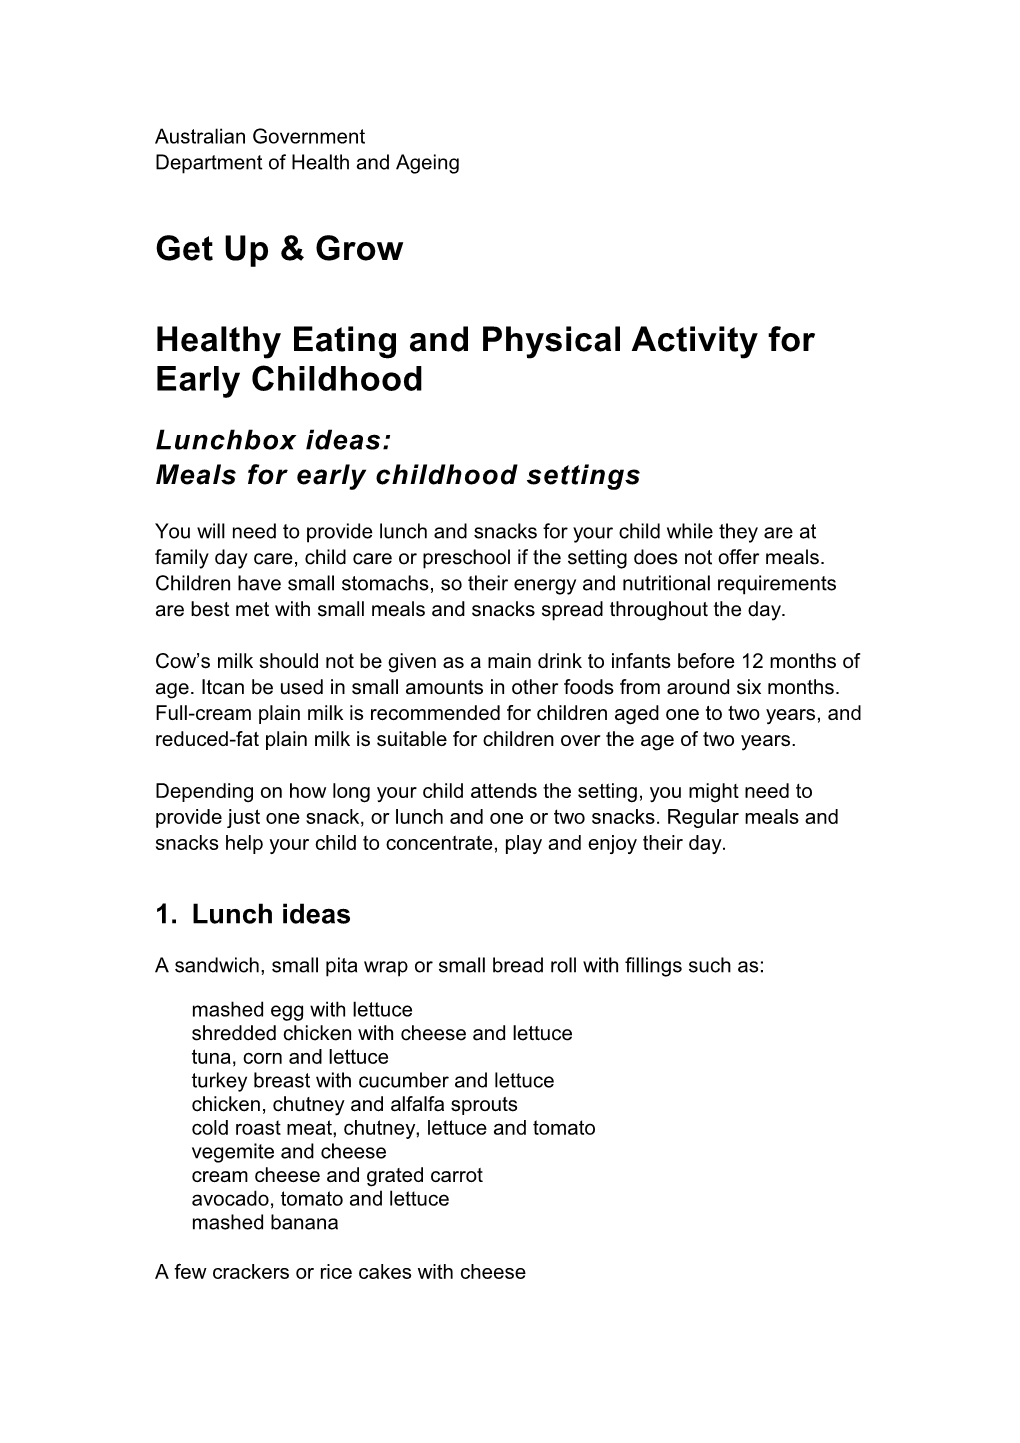 Get up and Grow - Healthy Eating and Physical Activity for Early Childhood